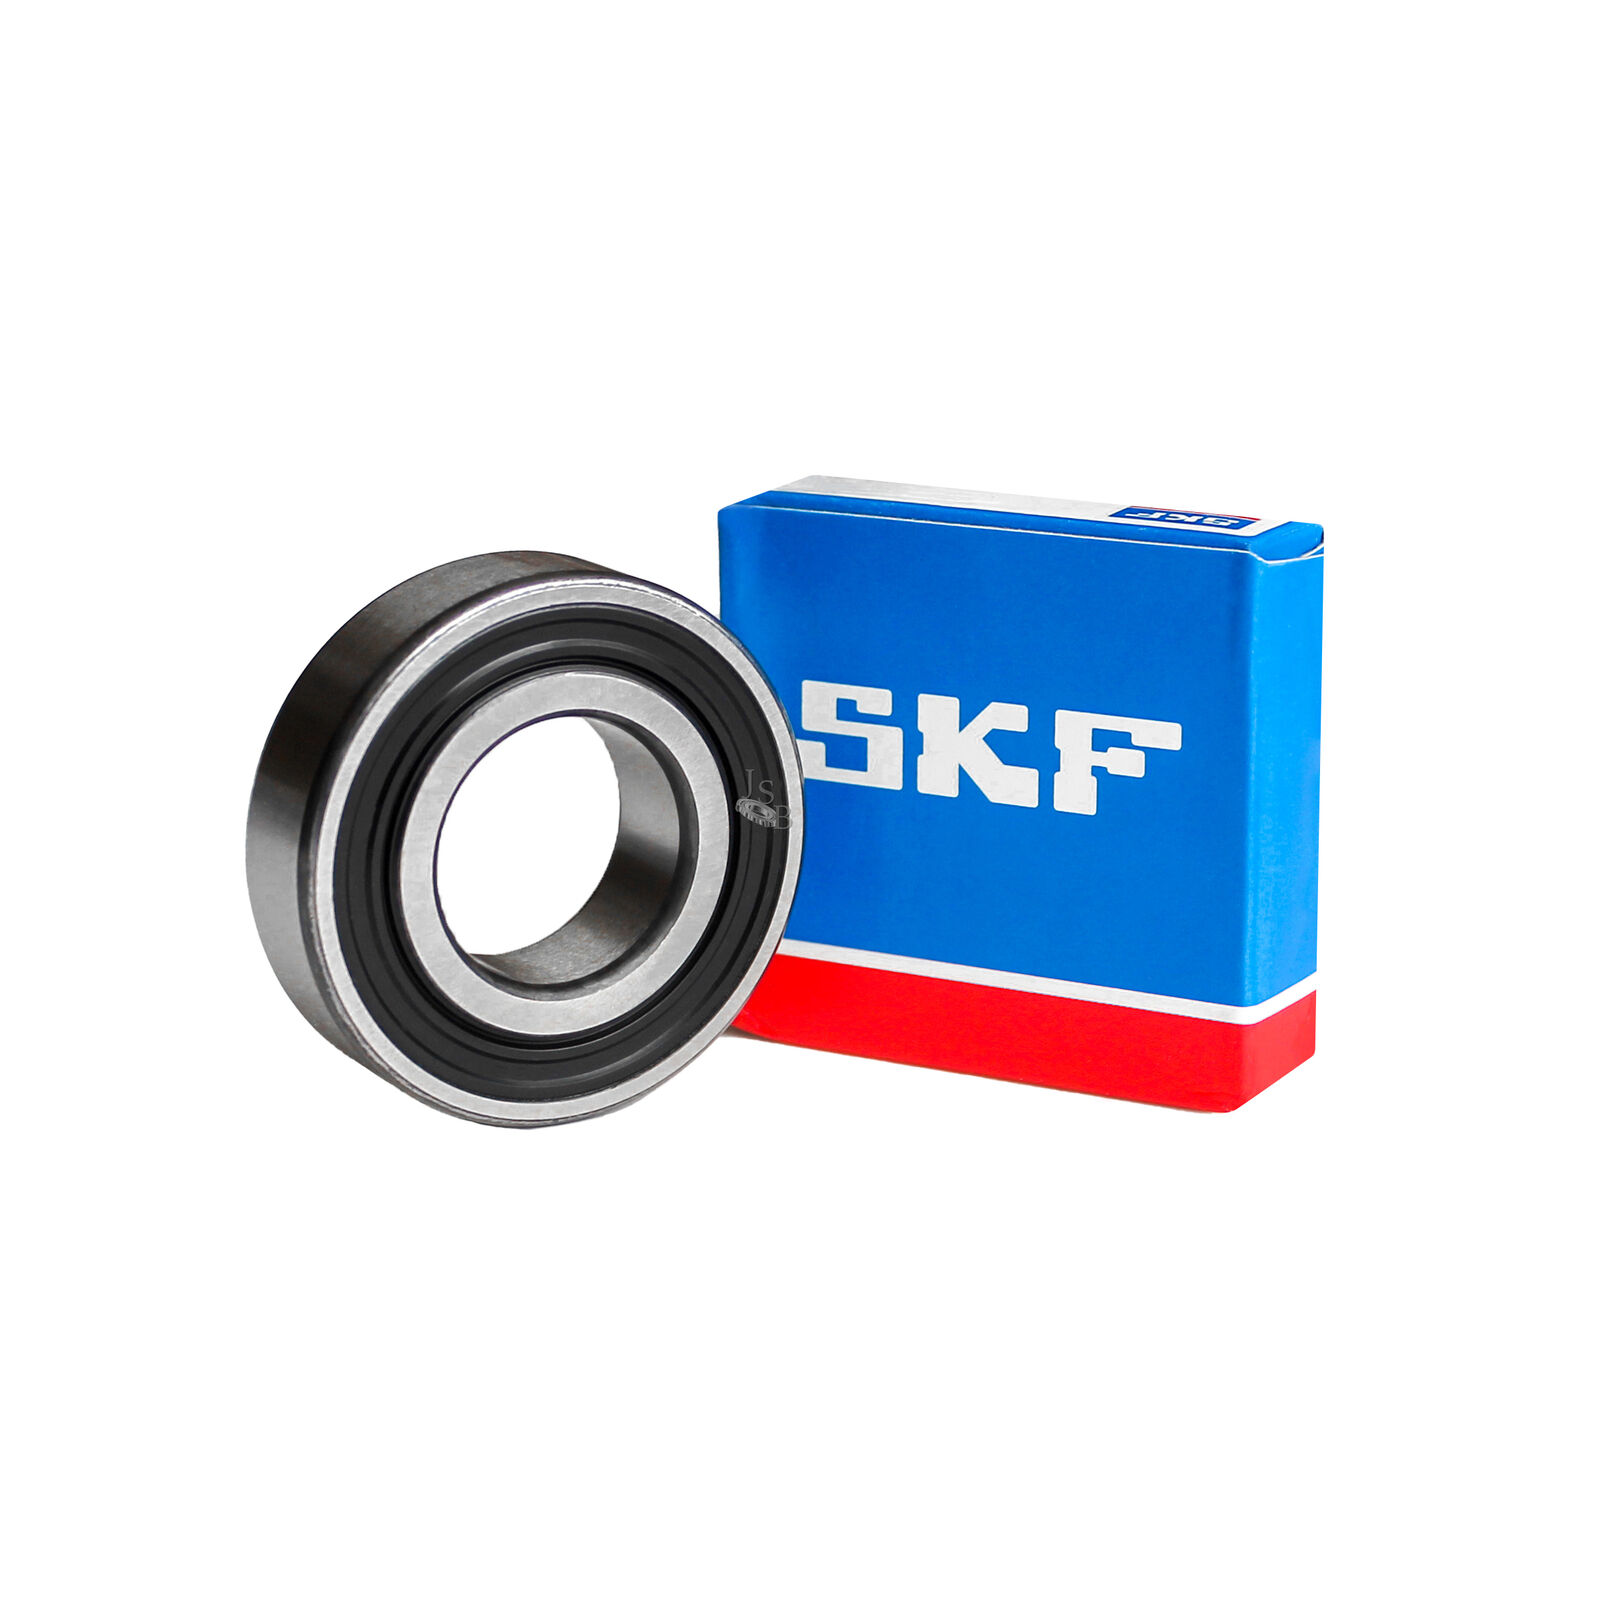 6010-2RS SKF Brand Rubber Seal Ball Bearing 50x80x16 6010 2RS 6010RS